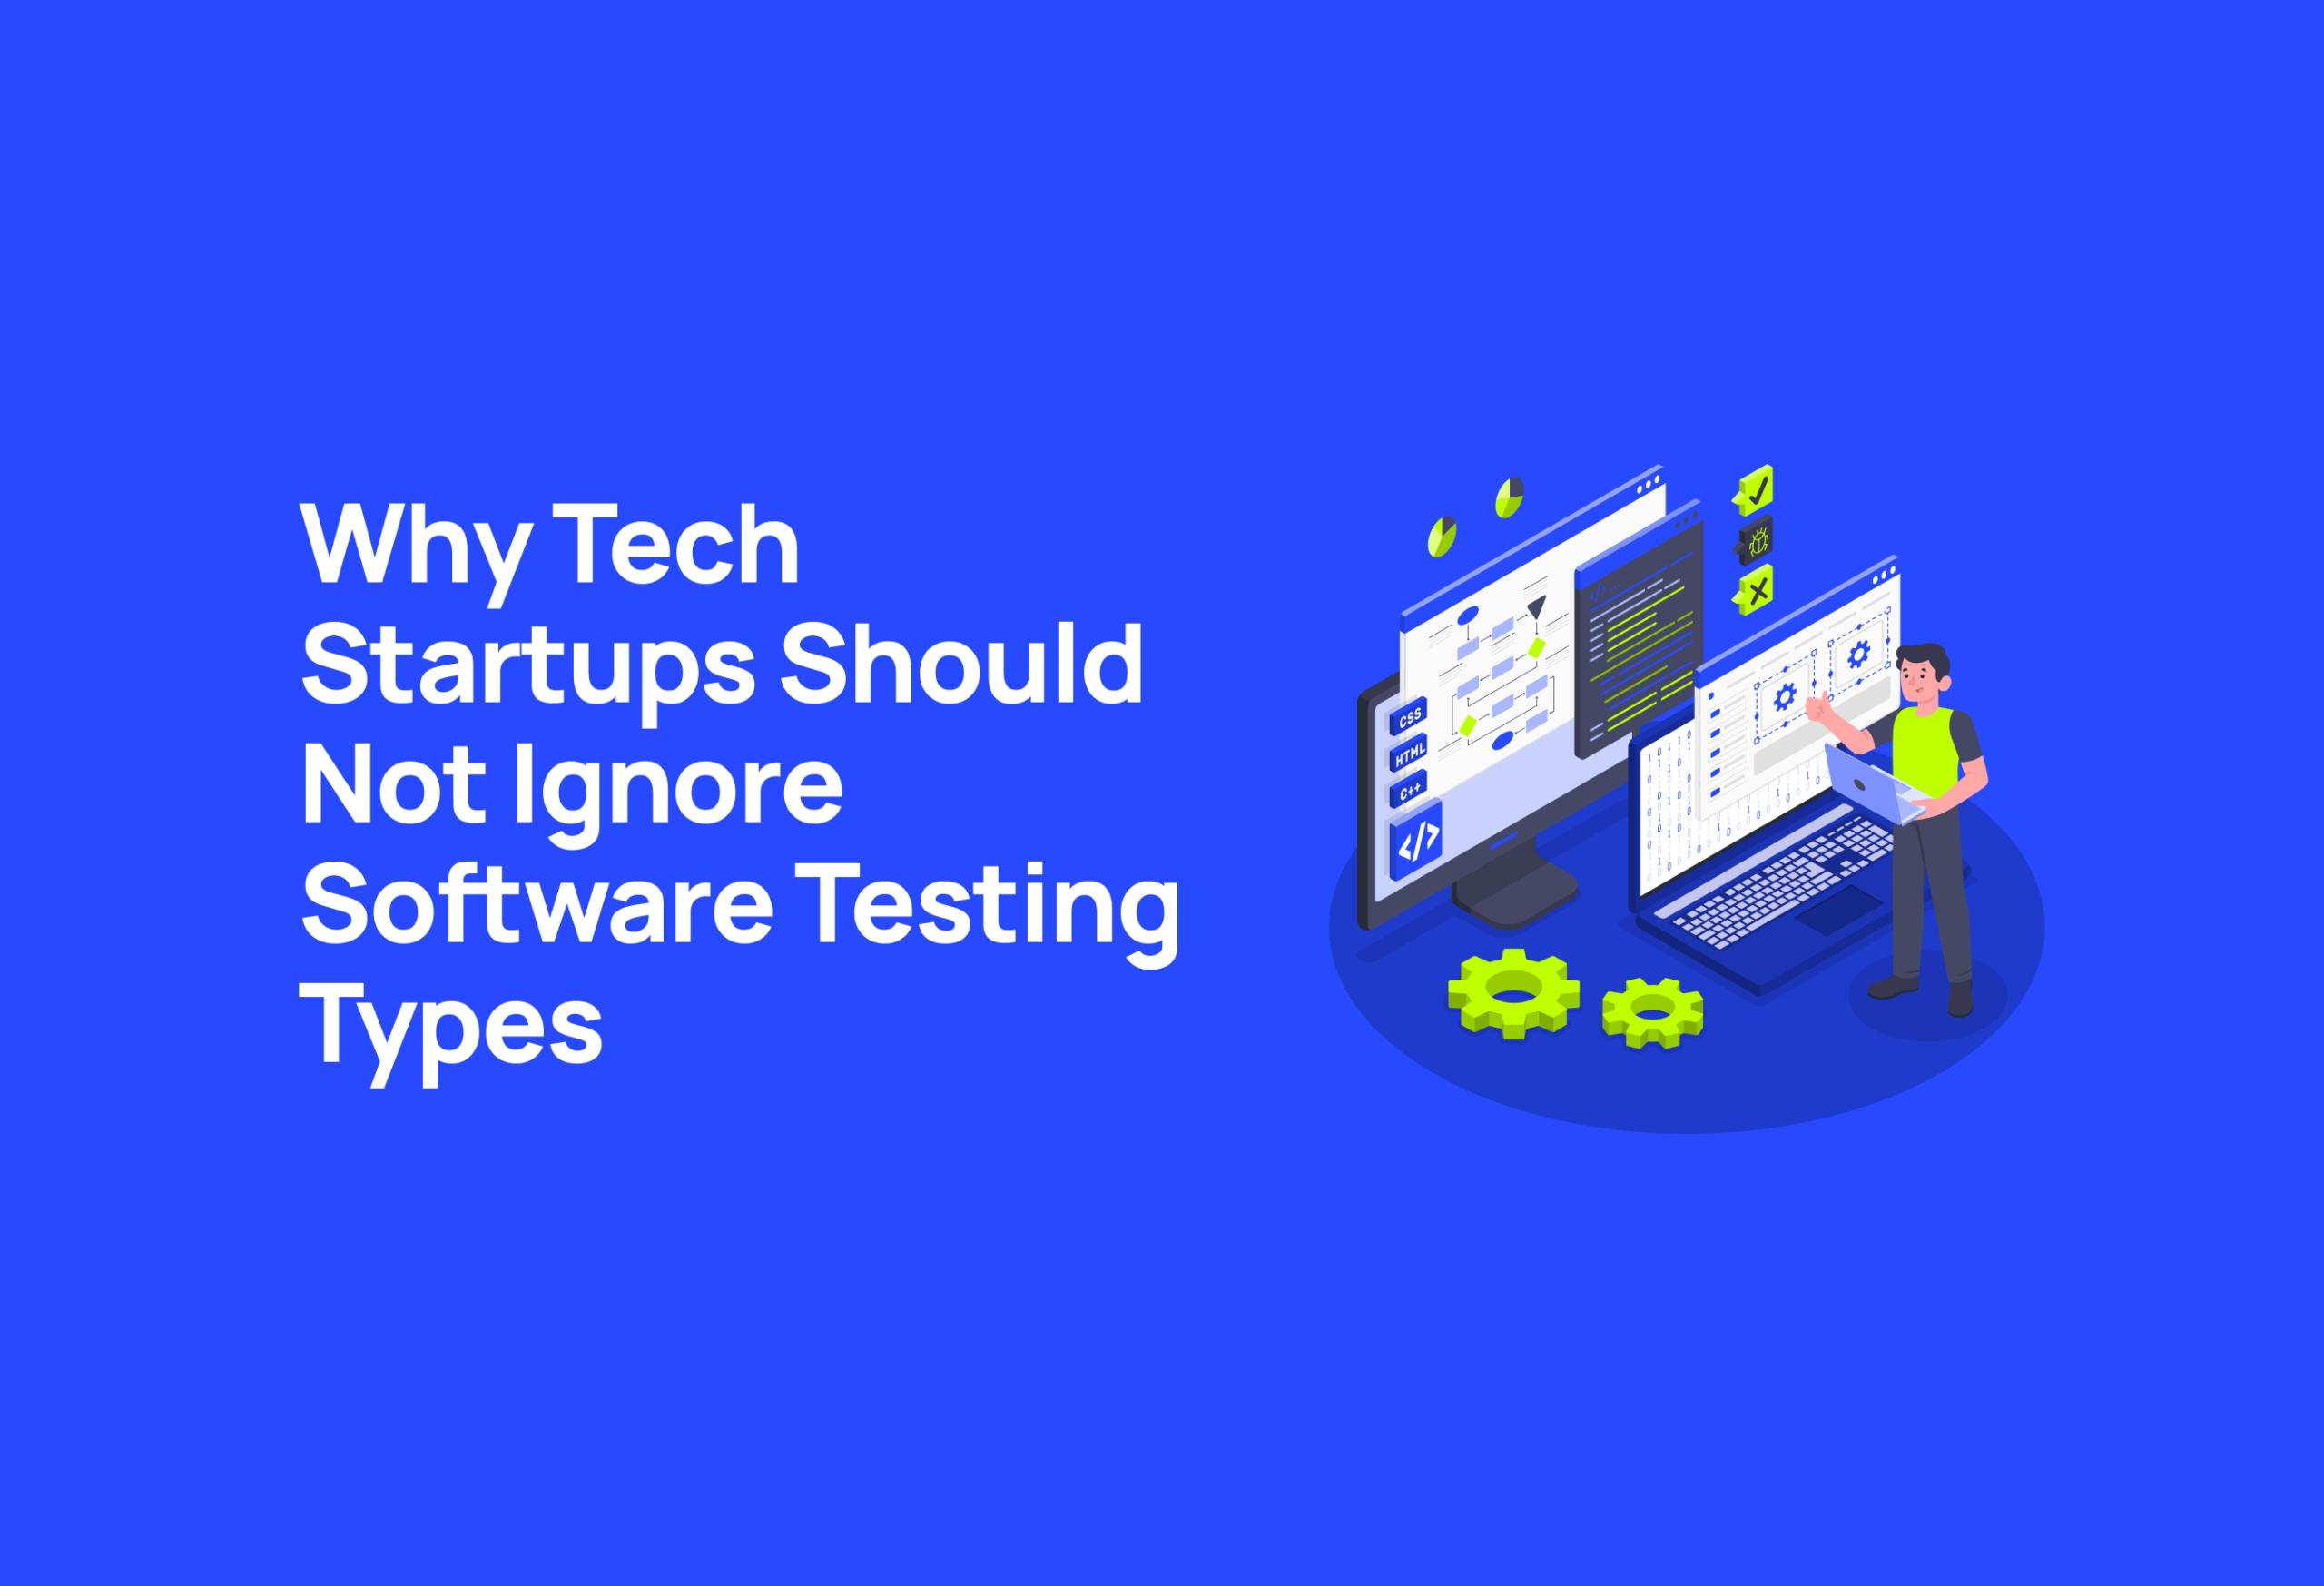 Tech Startups Should Not Ignore Software Testing Types